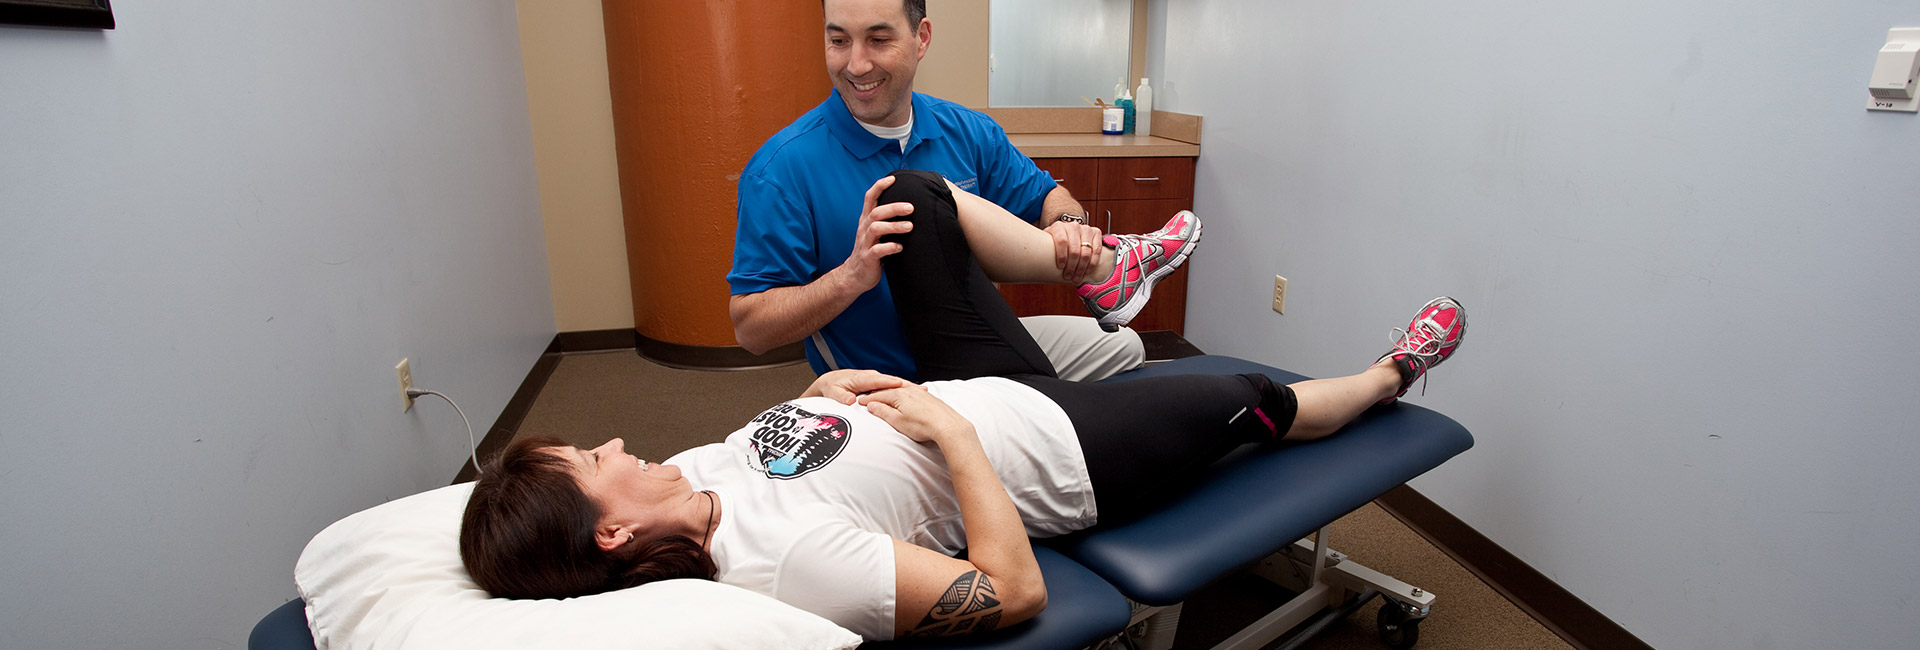 Orthopedic-Physical-Therapy---Therapeutic-Associates-Physical-Therapy